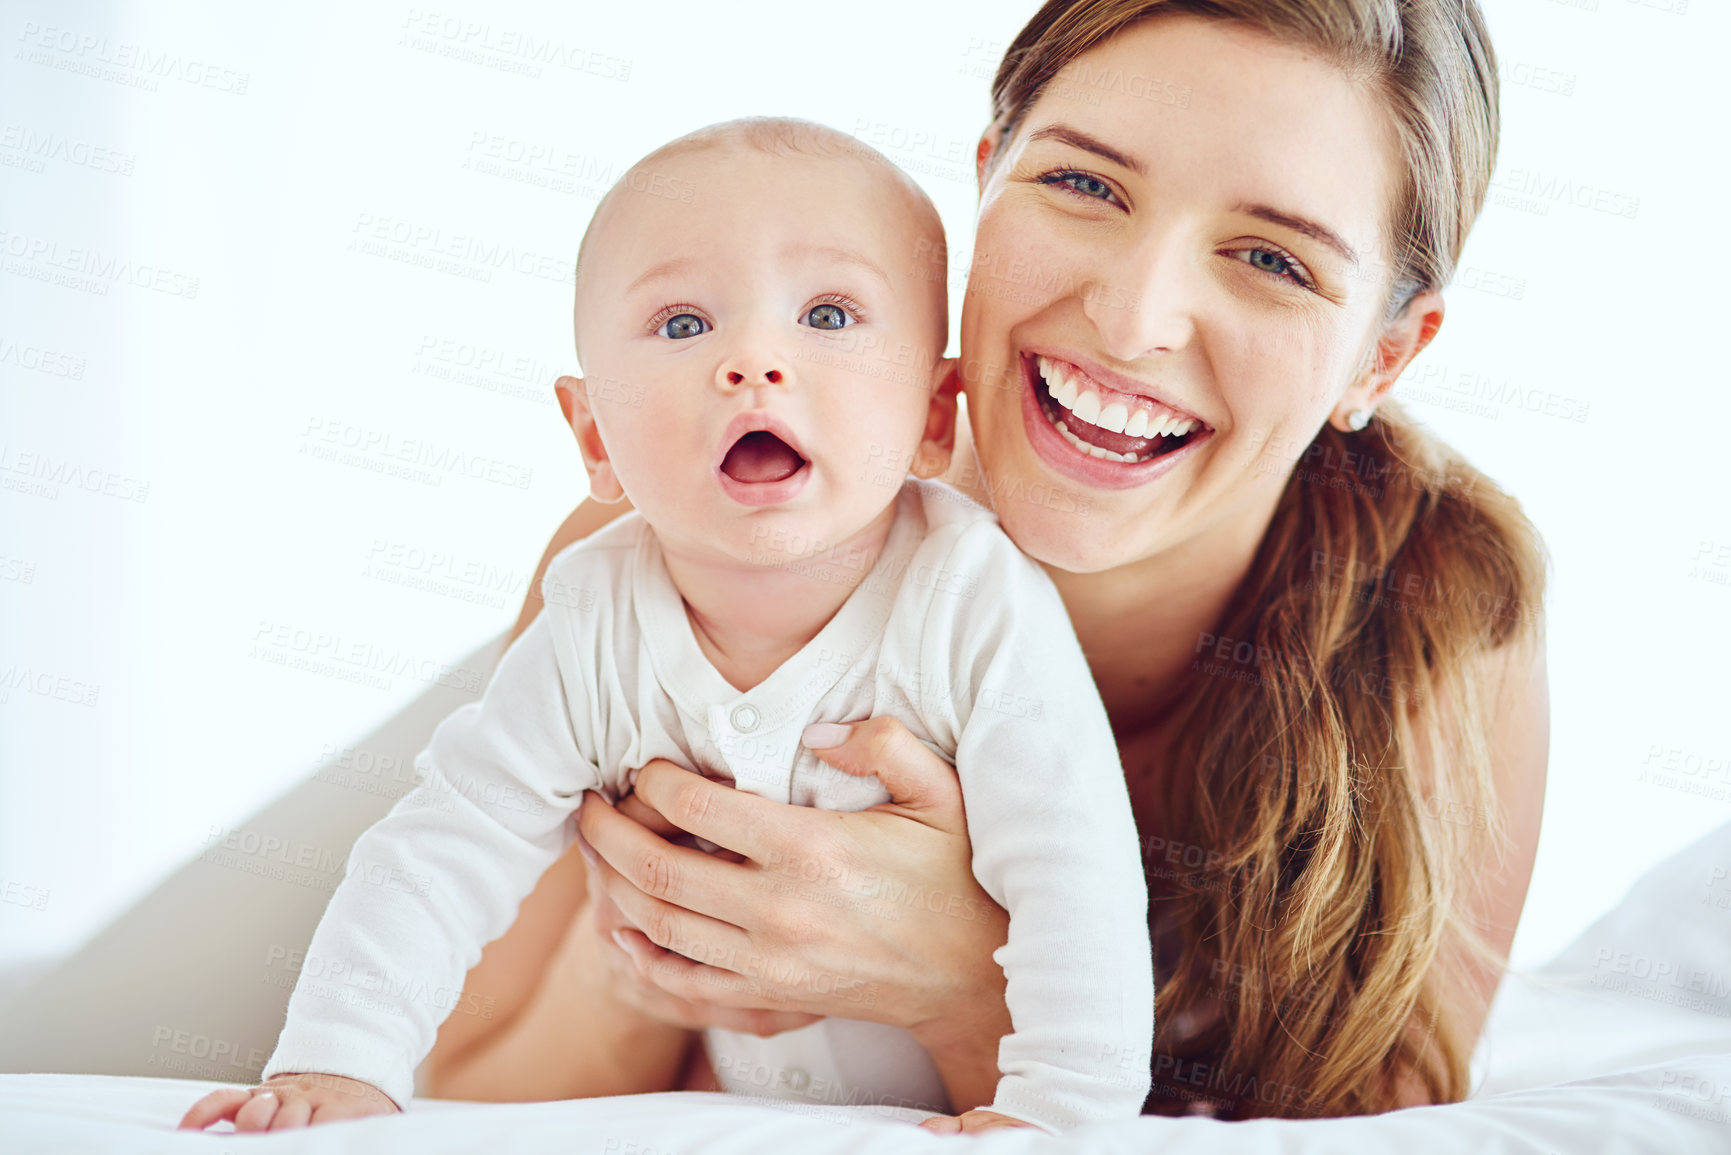 Buy stock photo Family, baby and bonding while smiling and lying on a bed together at home. Portrait of a happy, loving and caring mother holding her adorable infant son, laughing and feeling cheerful while cuddling